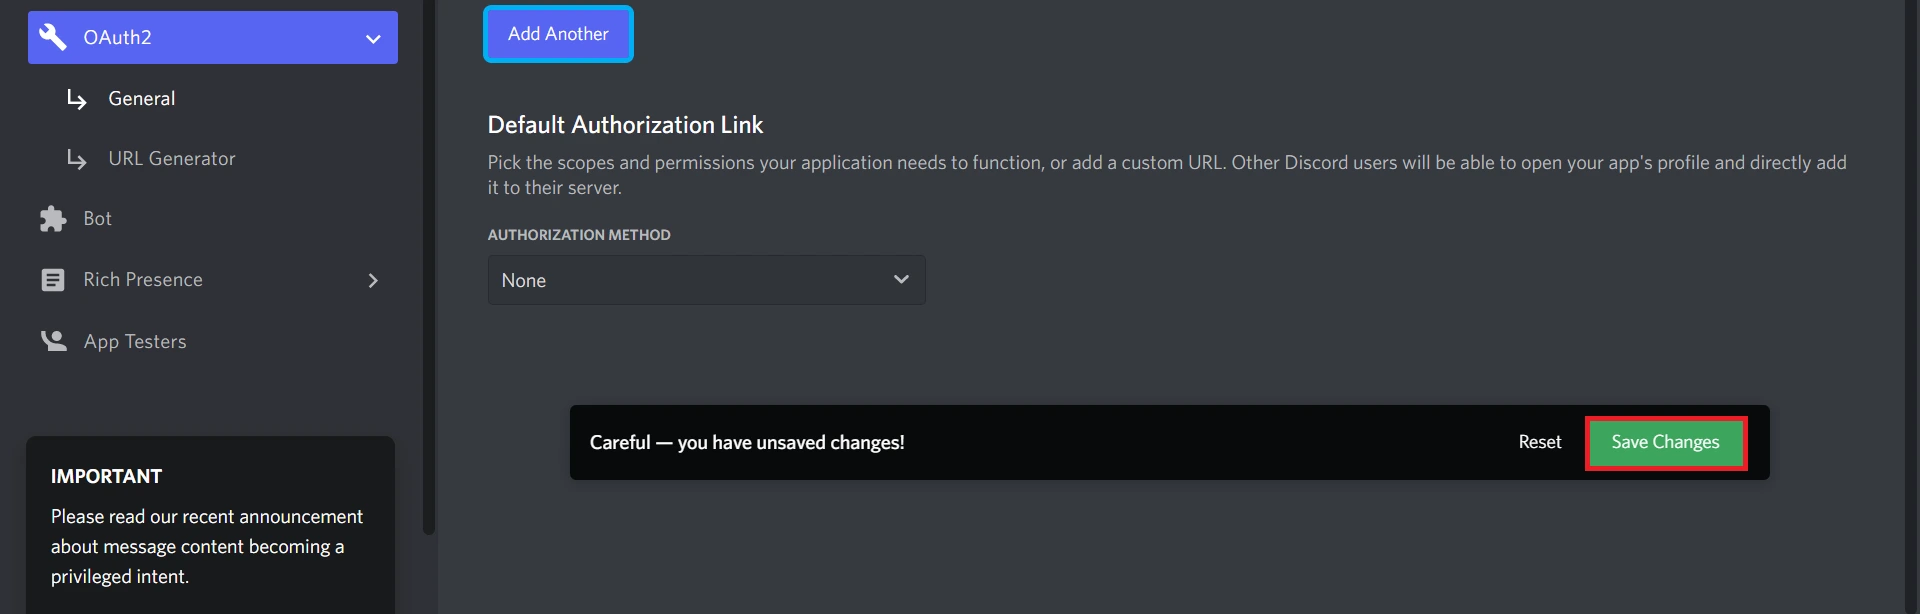 Save Changes | Discord OAuth & OpenID Single Sign-On (SSO)